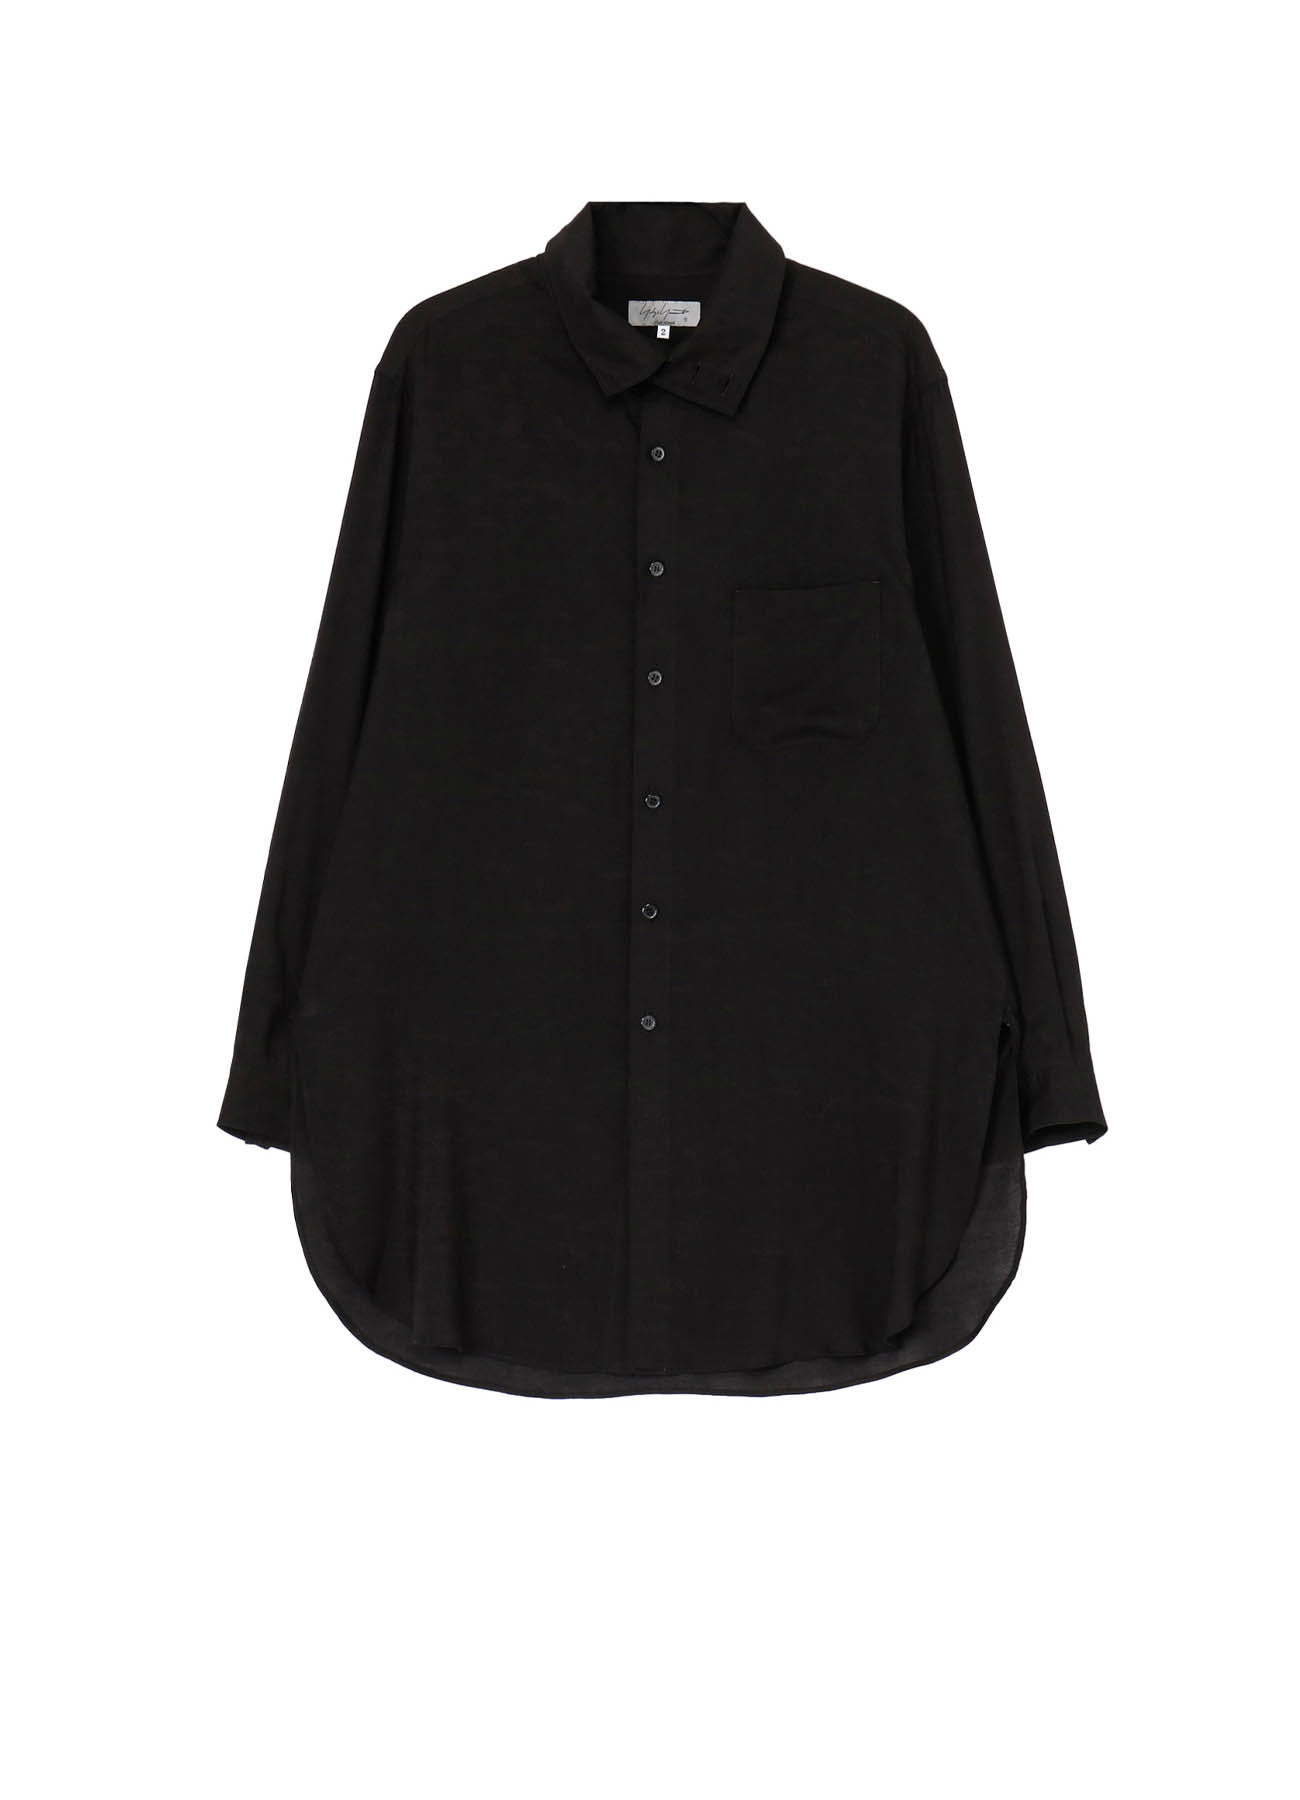 CELLLOSE LOAN STAND COLLAR BLOUSE